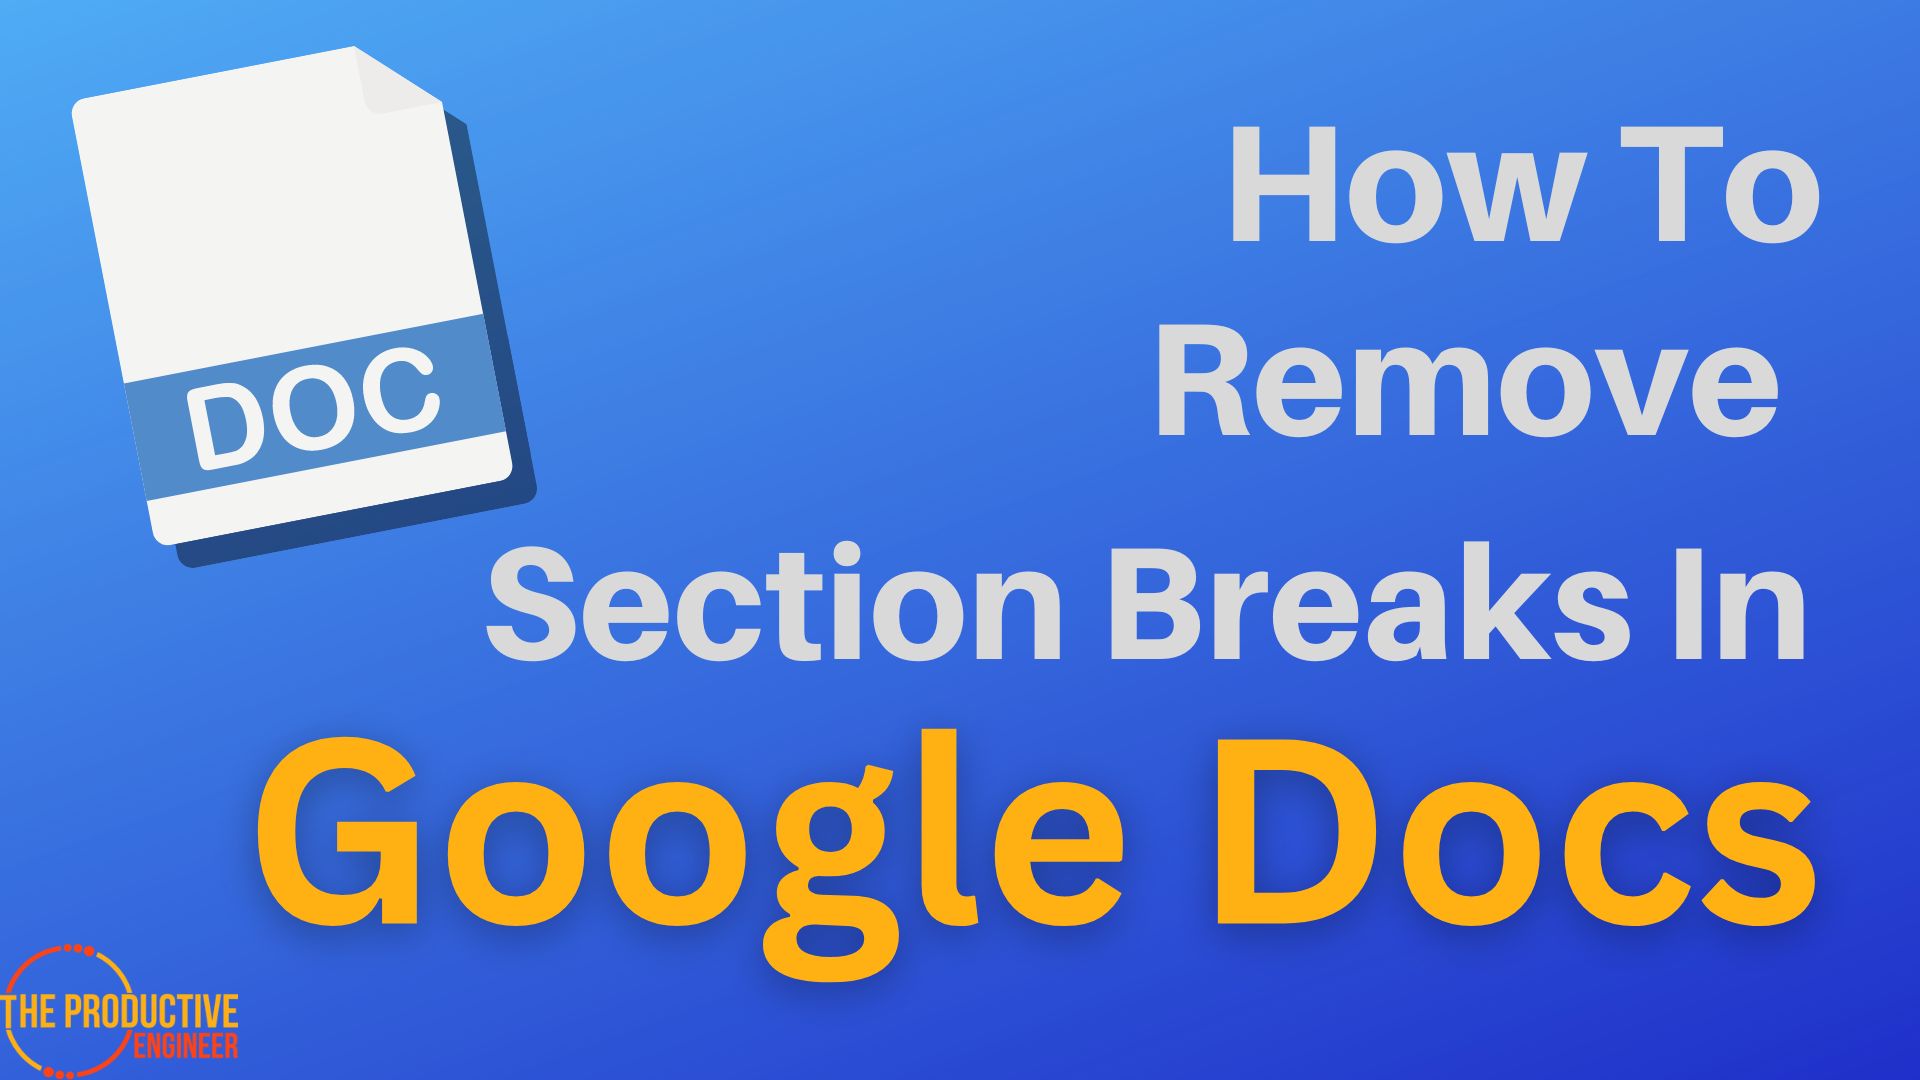 How To Remove Section Breaks In Google Docs